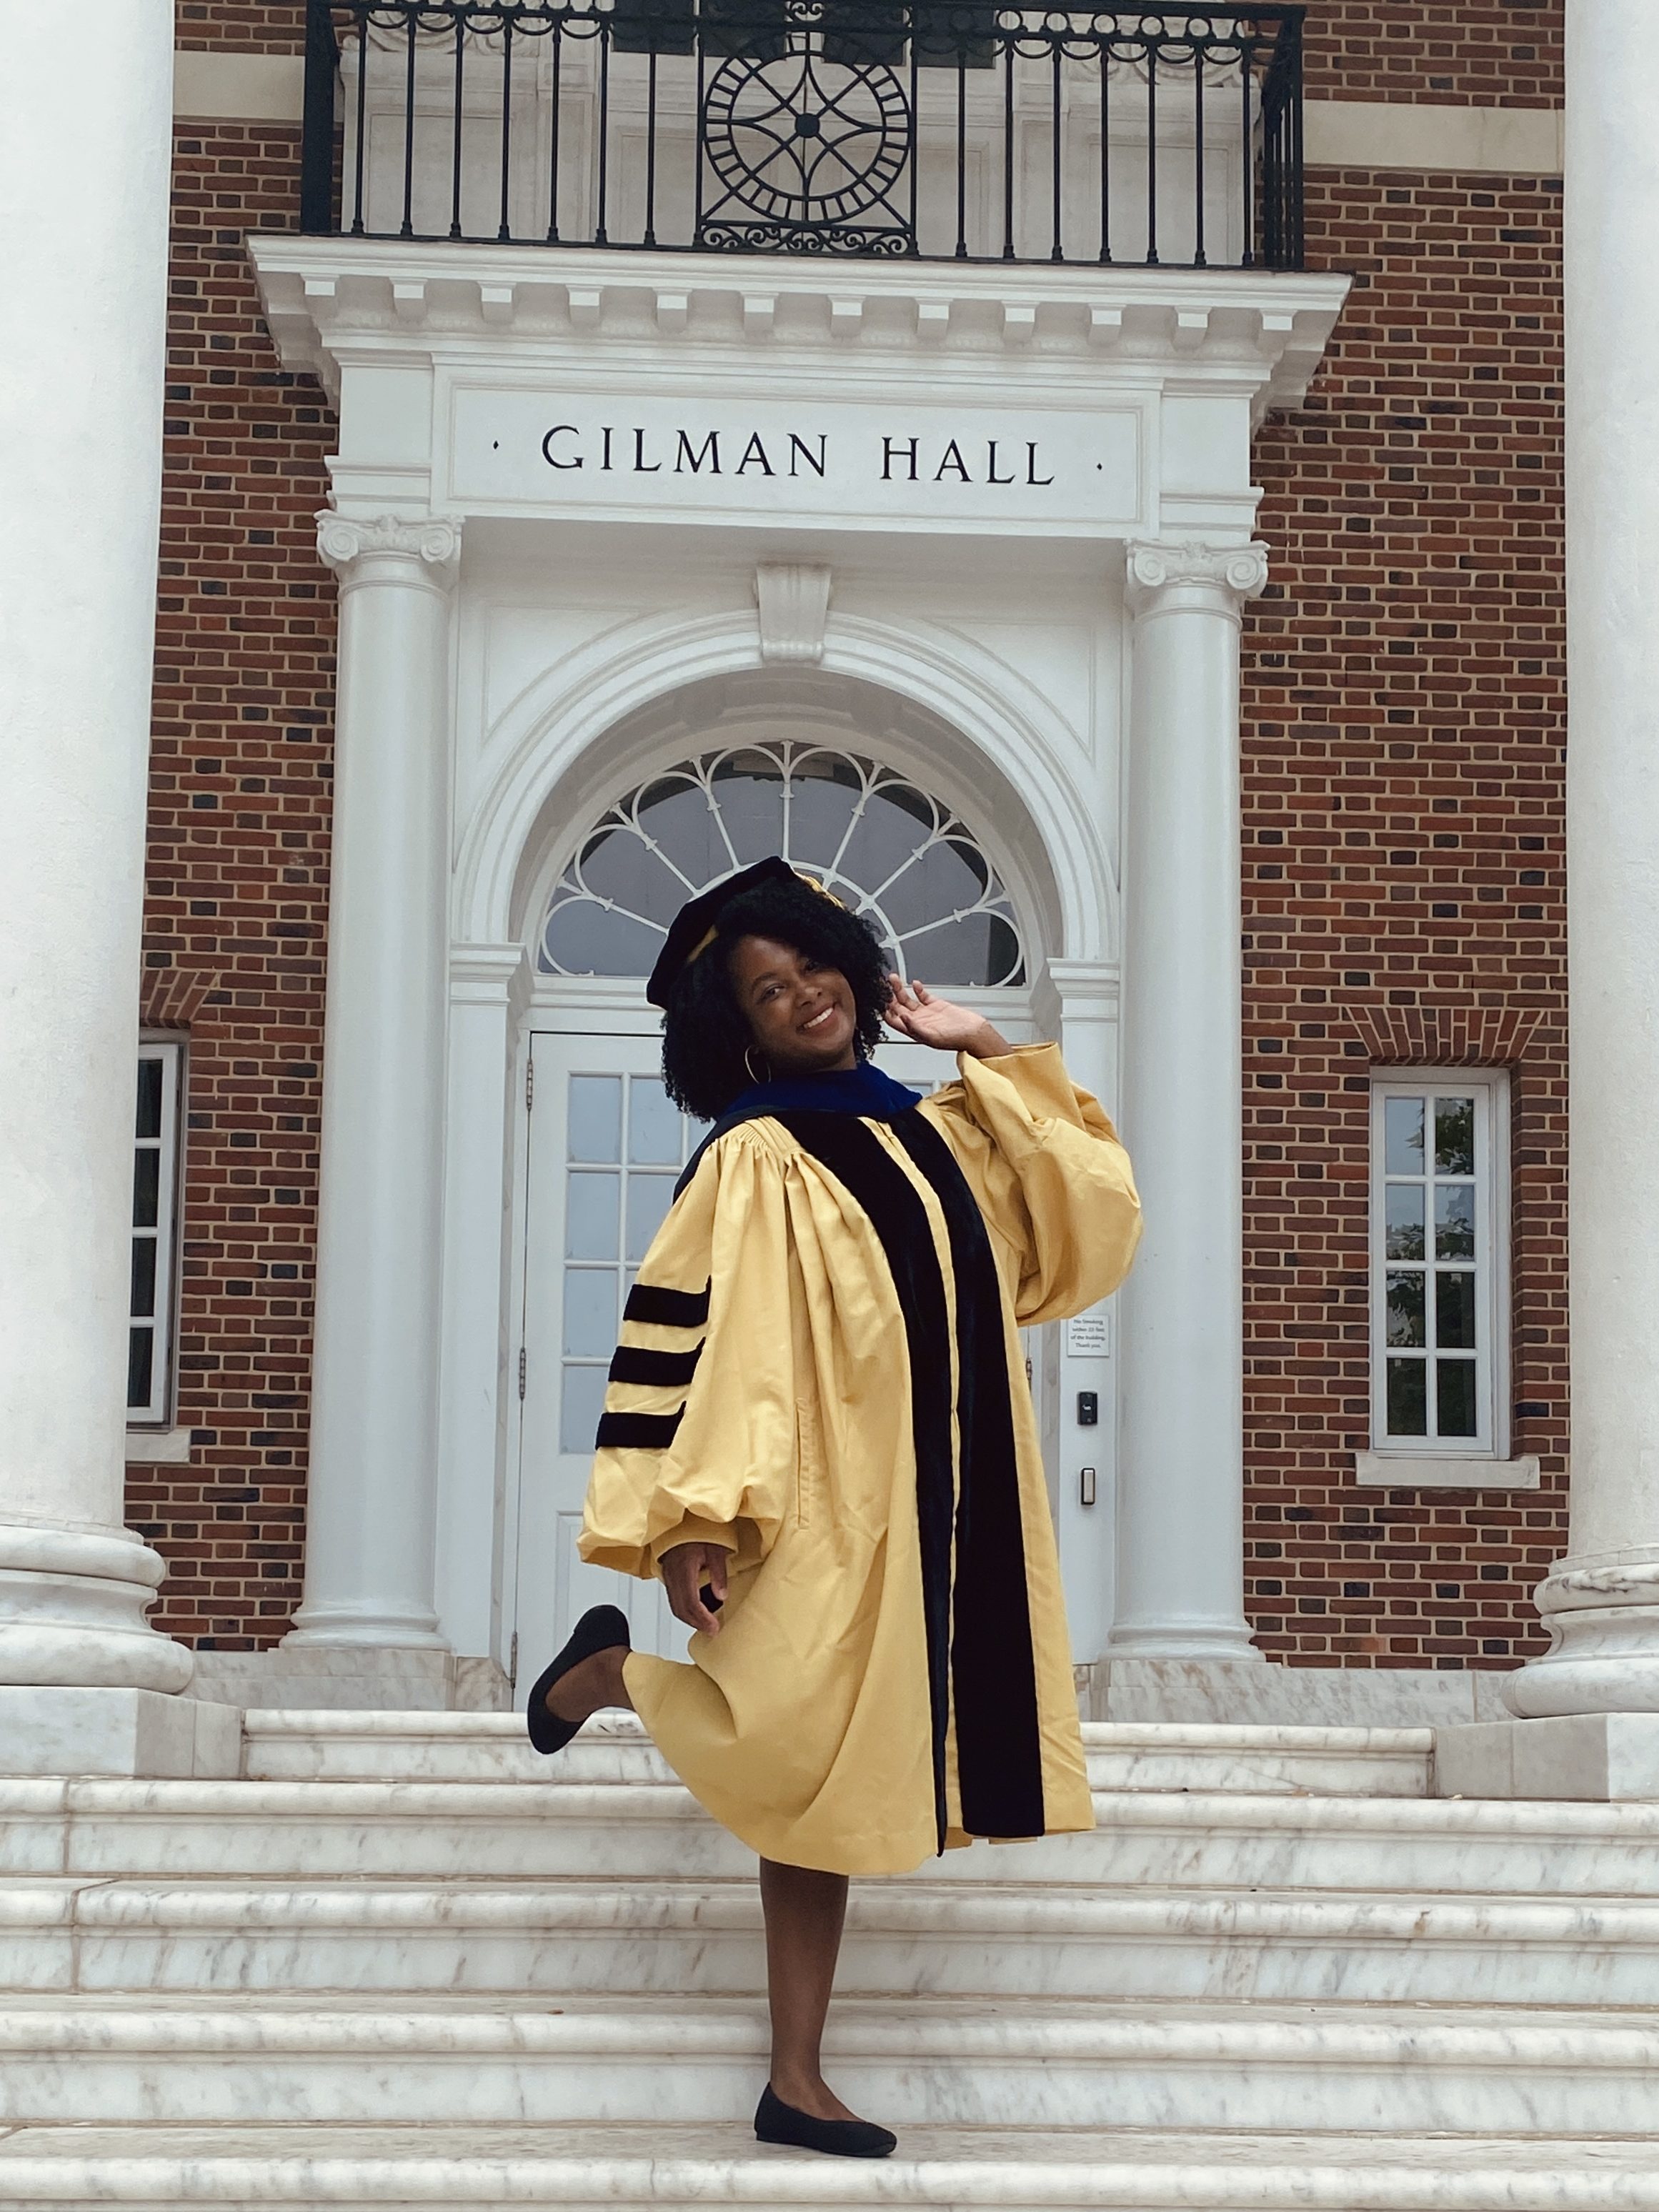 Graduation photo on the steps of Gilman Hall at Johns Hopkins University. Pictured graduated is wearing a yellow and black Ph.D. graduation robe.